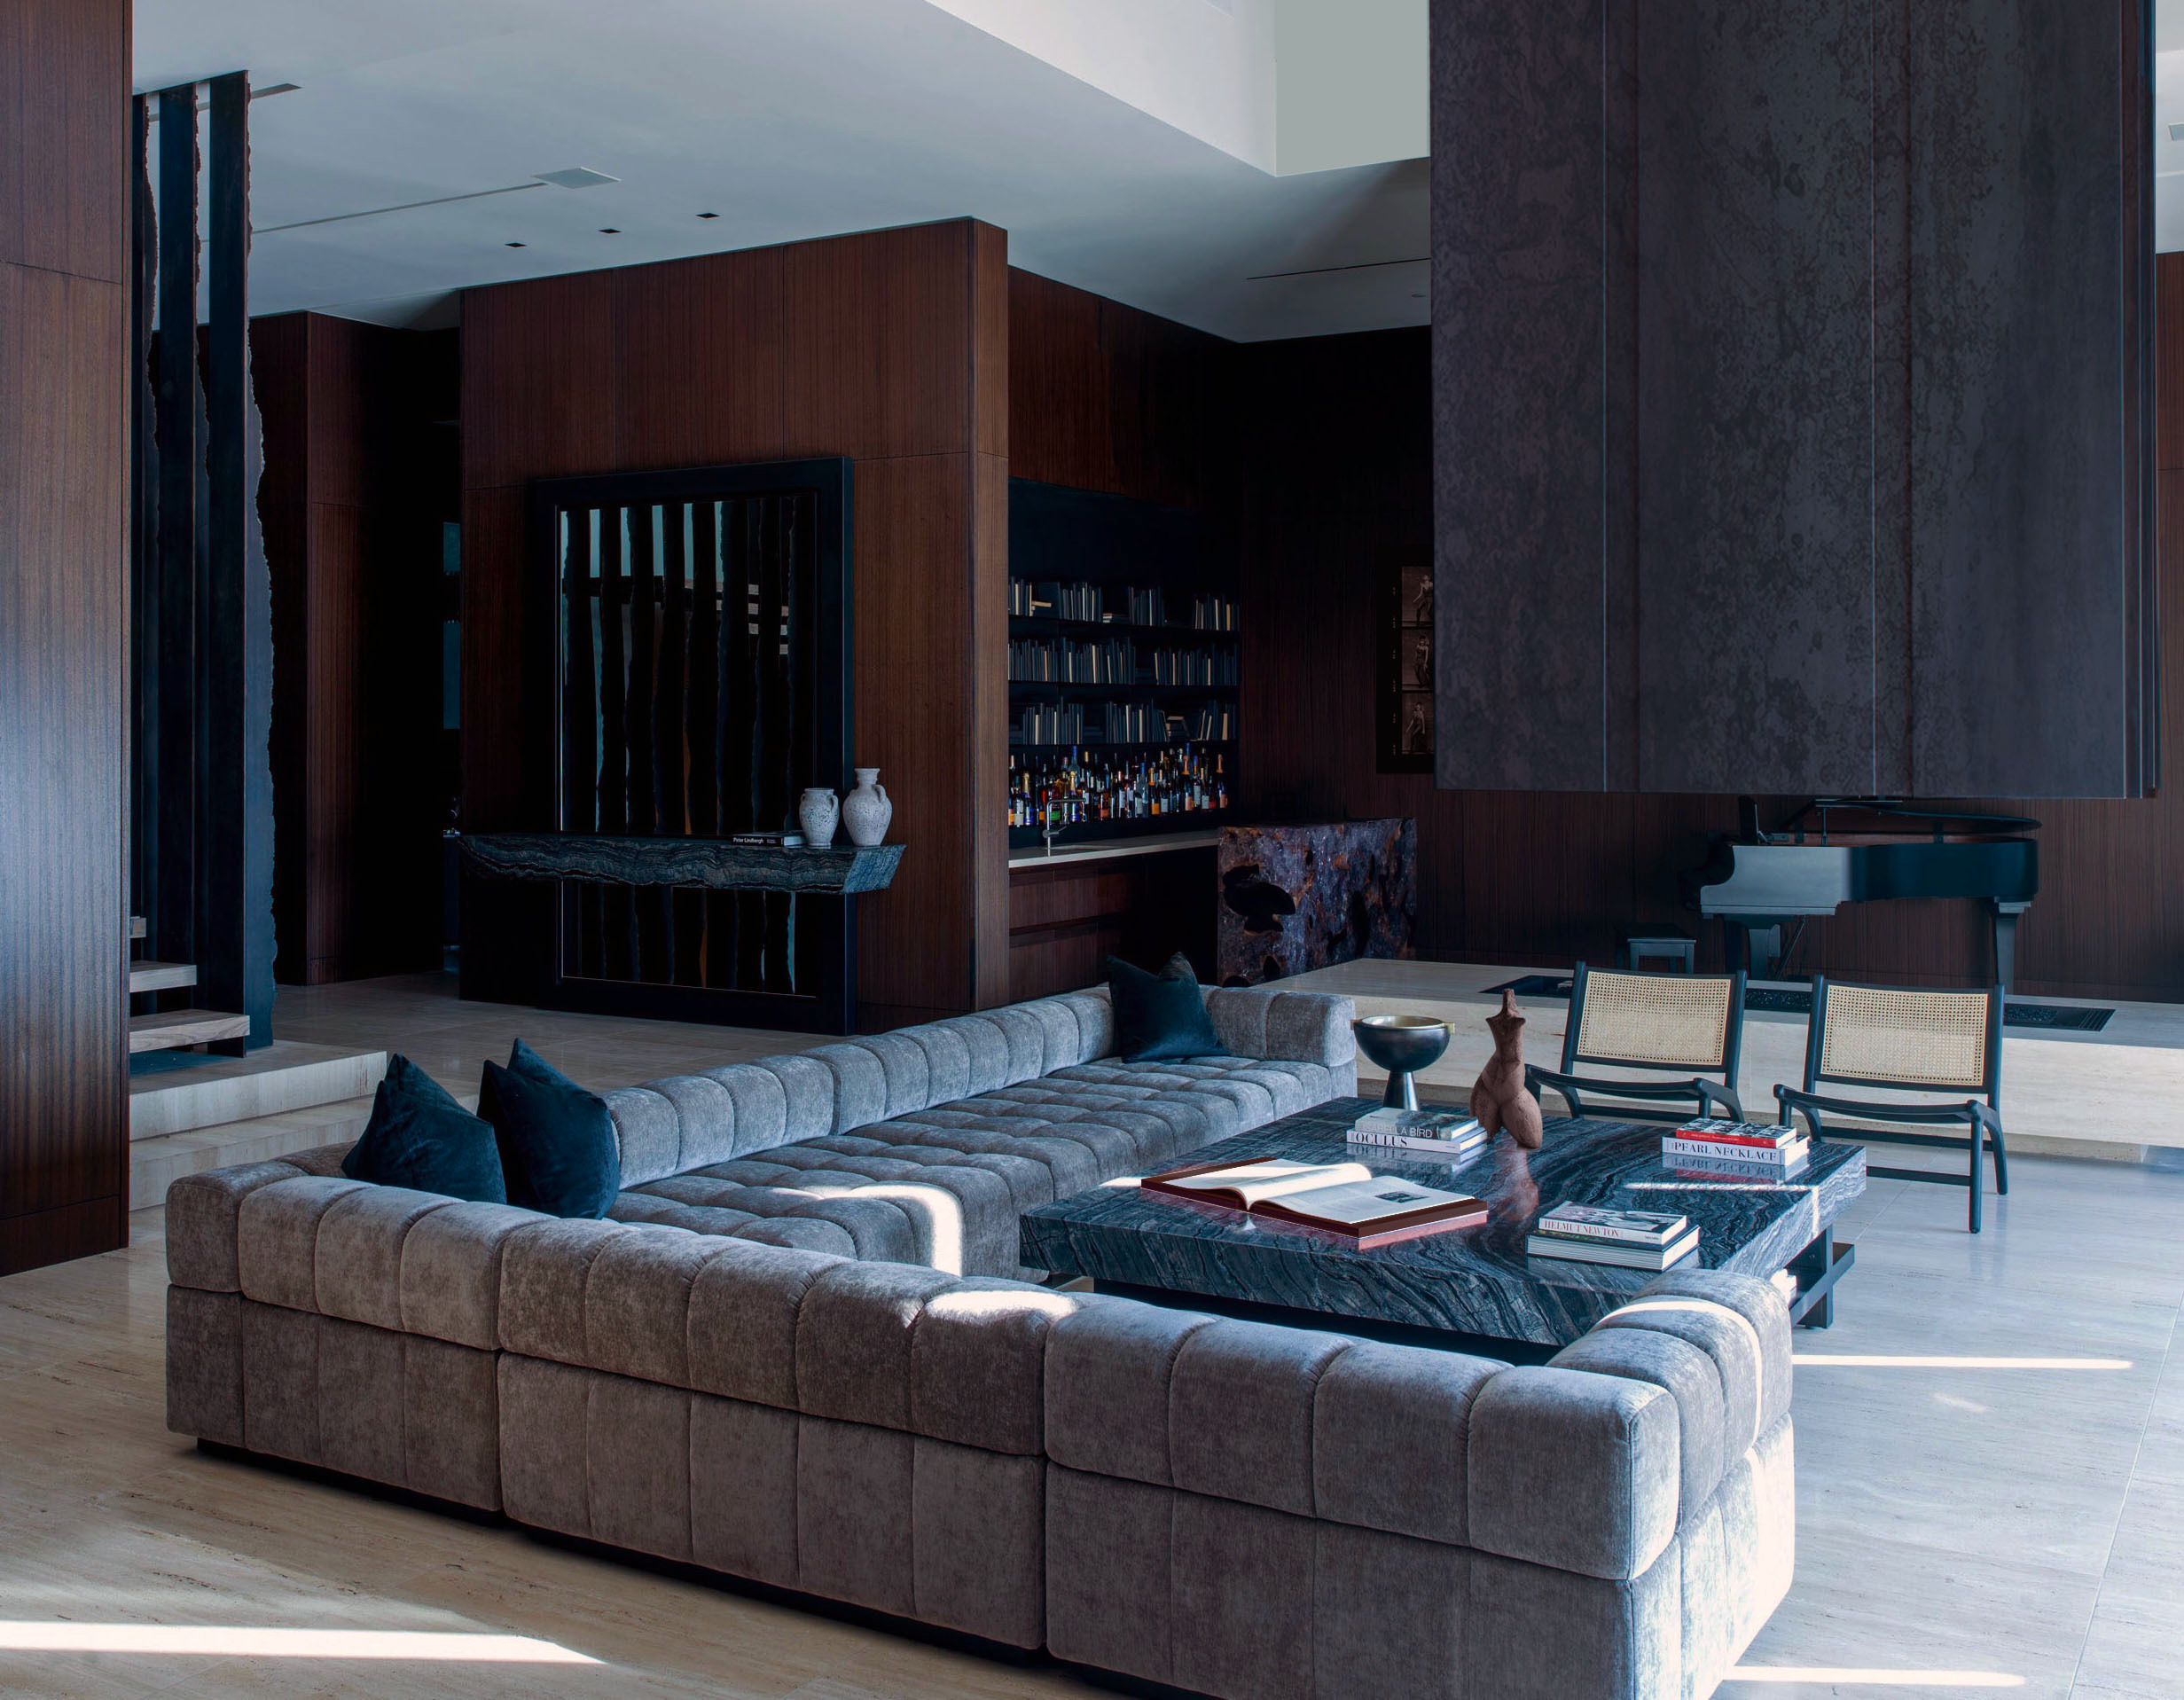 Beautiful living rooms : this one is interior designed by Ryan Saghian